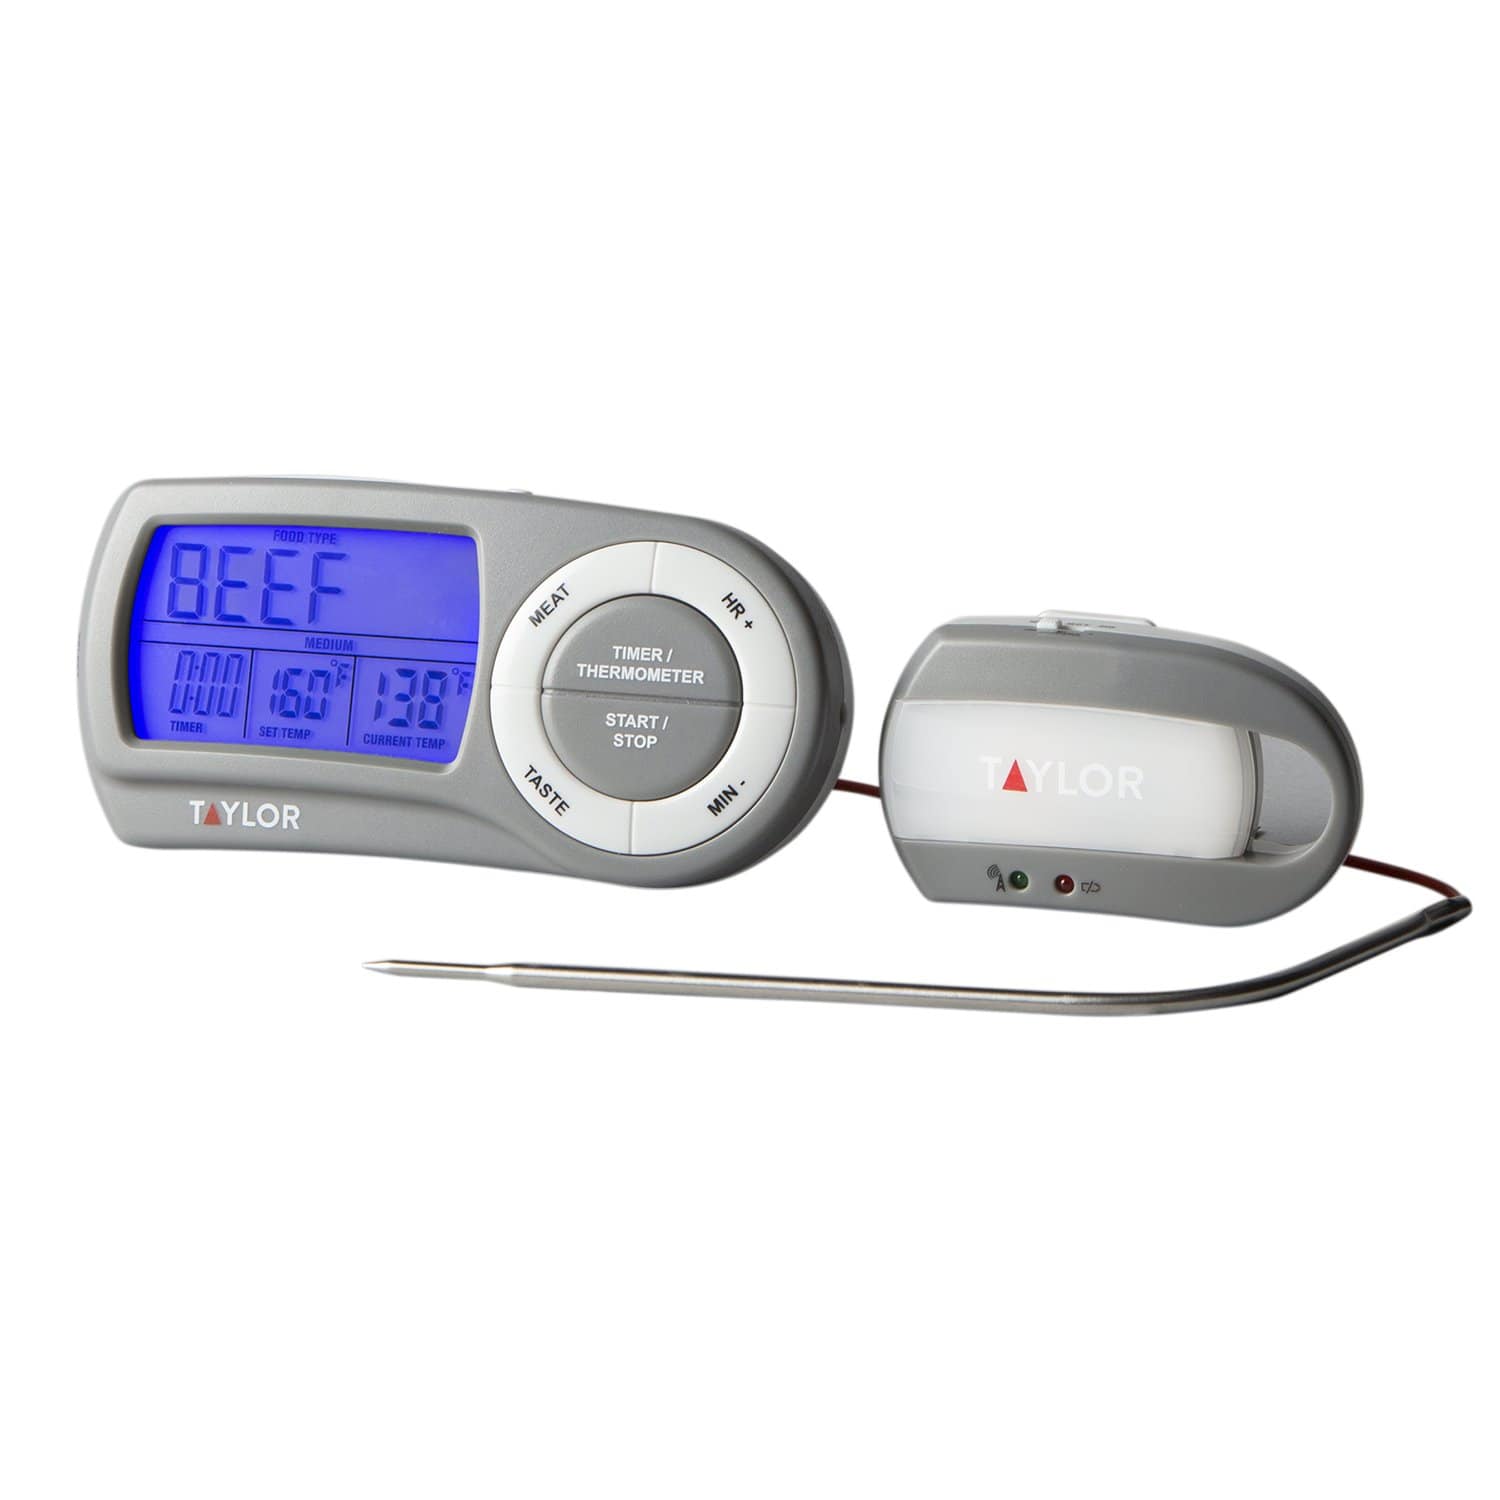 Wireless Thermometer